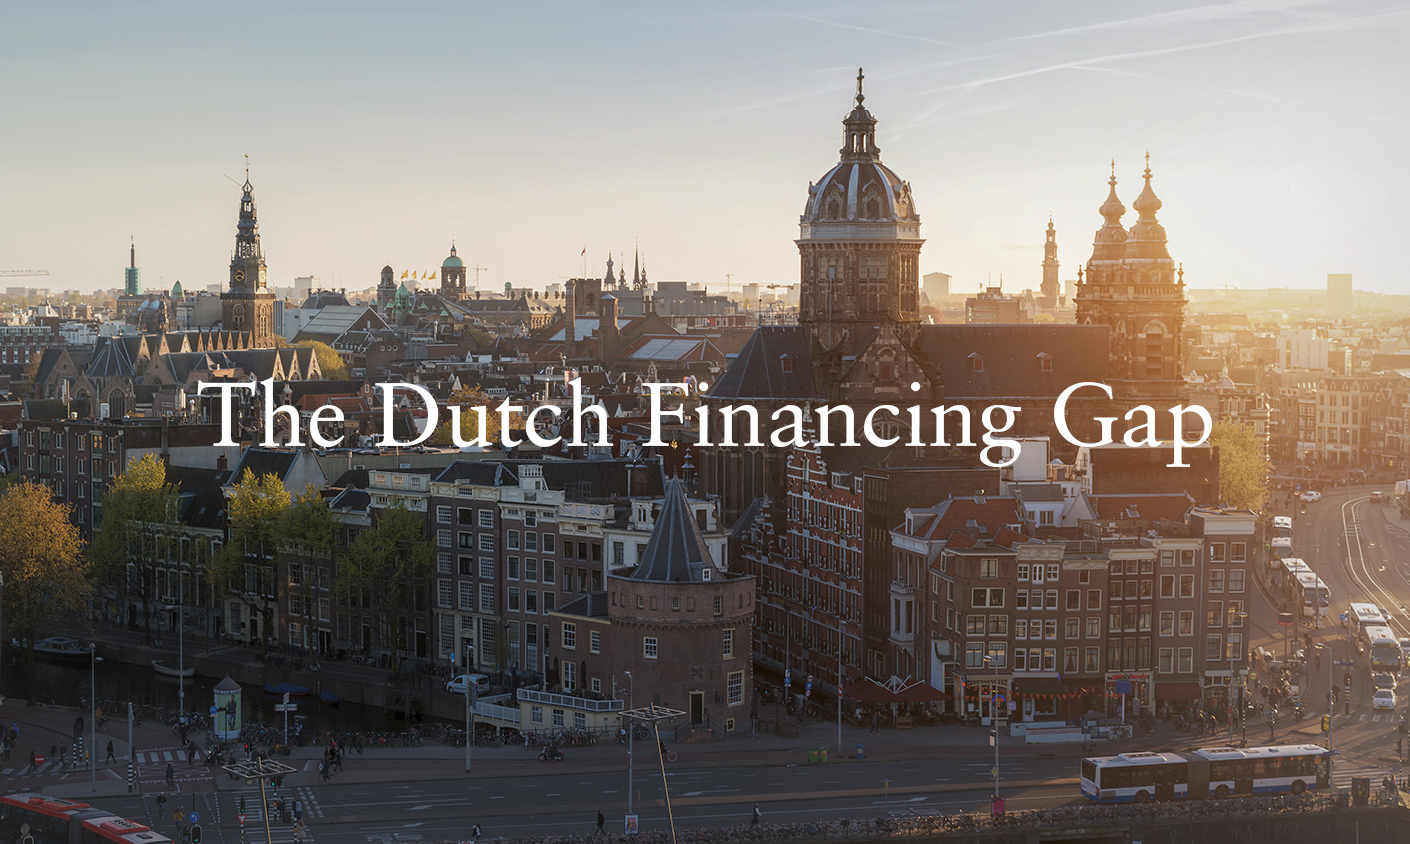 Pacenotes partnered with Lakestar to publish the Dutch Financing Gap report